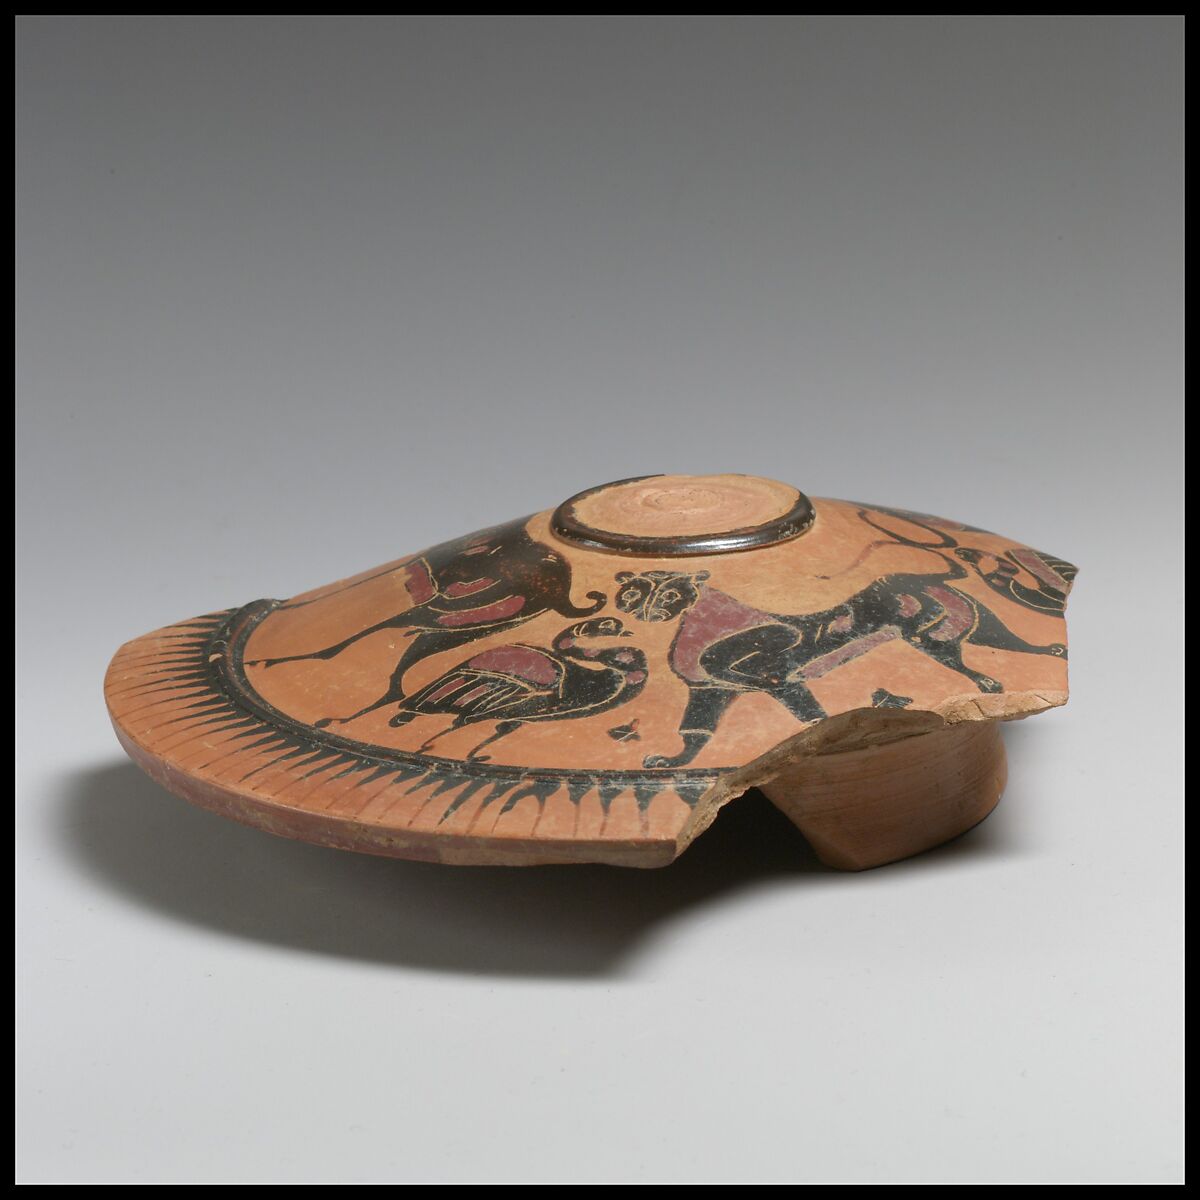 Terracotta lid, Attributed to the Group of the Vienna Amphora, Terracotta, Greek, Chalcidian 